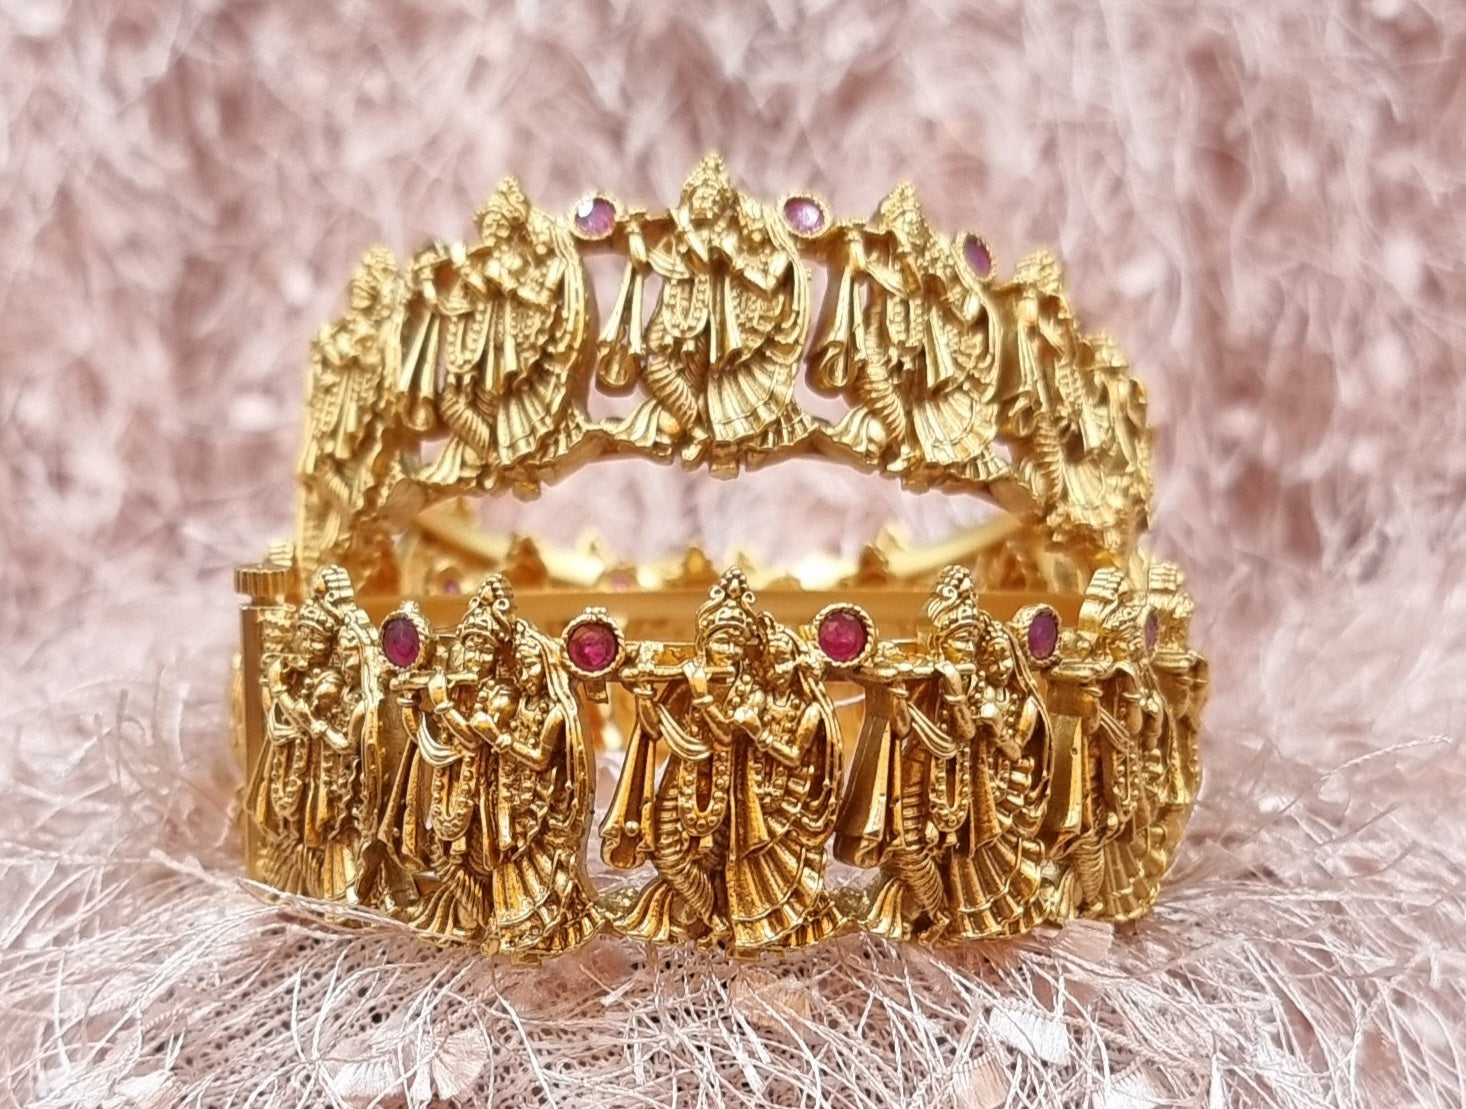 Micron Gold Plated Openable Kada Bangle With Wedding Motif Carvings, Encrusted With Synthetic Stones.